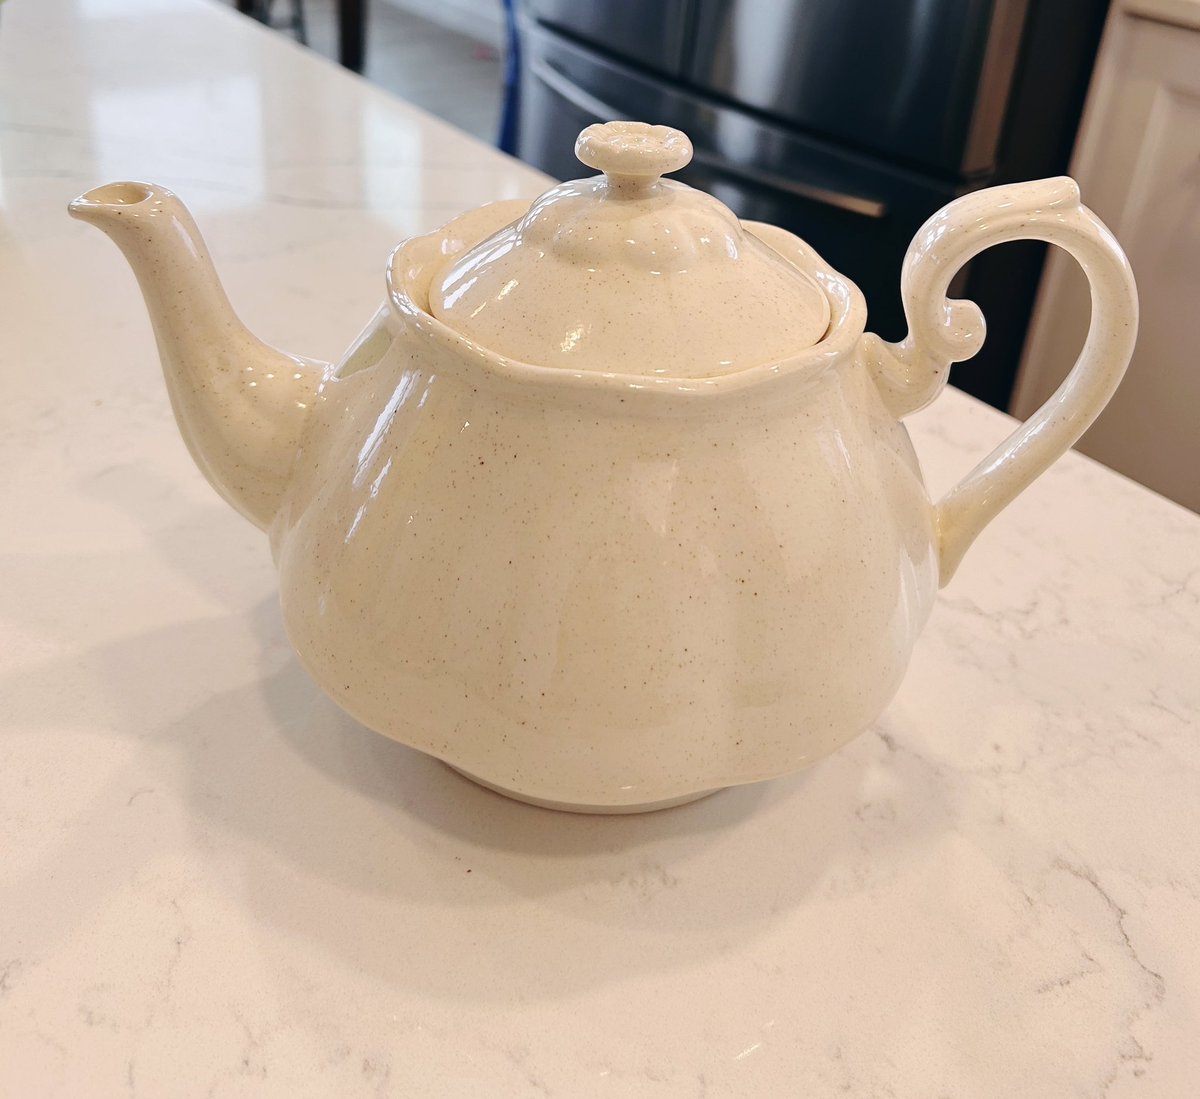 When my mom made this teapot in a high school class in 1980, I wonder if it occurred to her that her grandsons would be having a tea party with it 44 years later 🥰